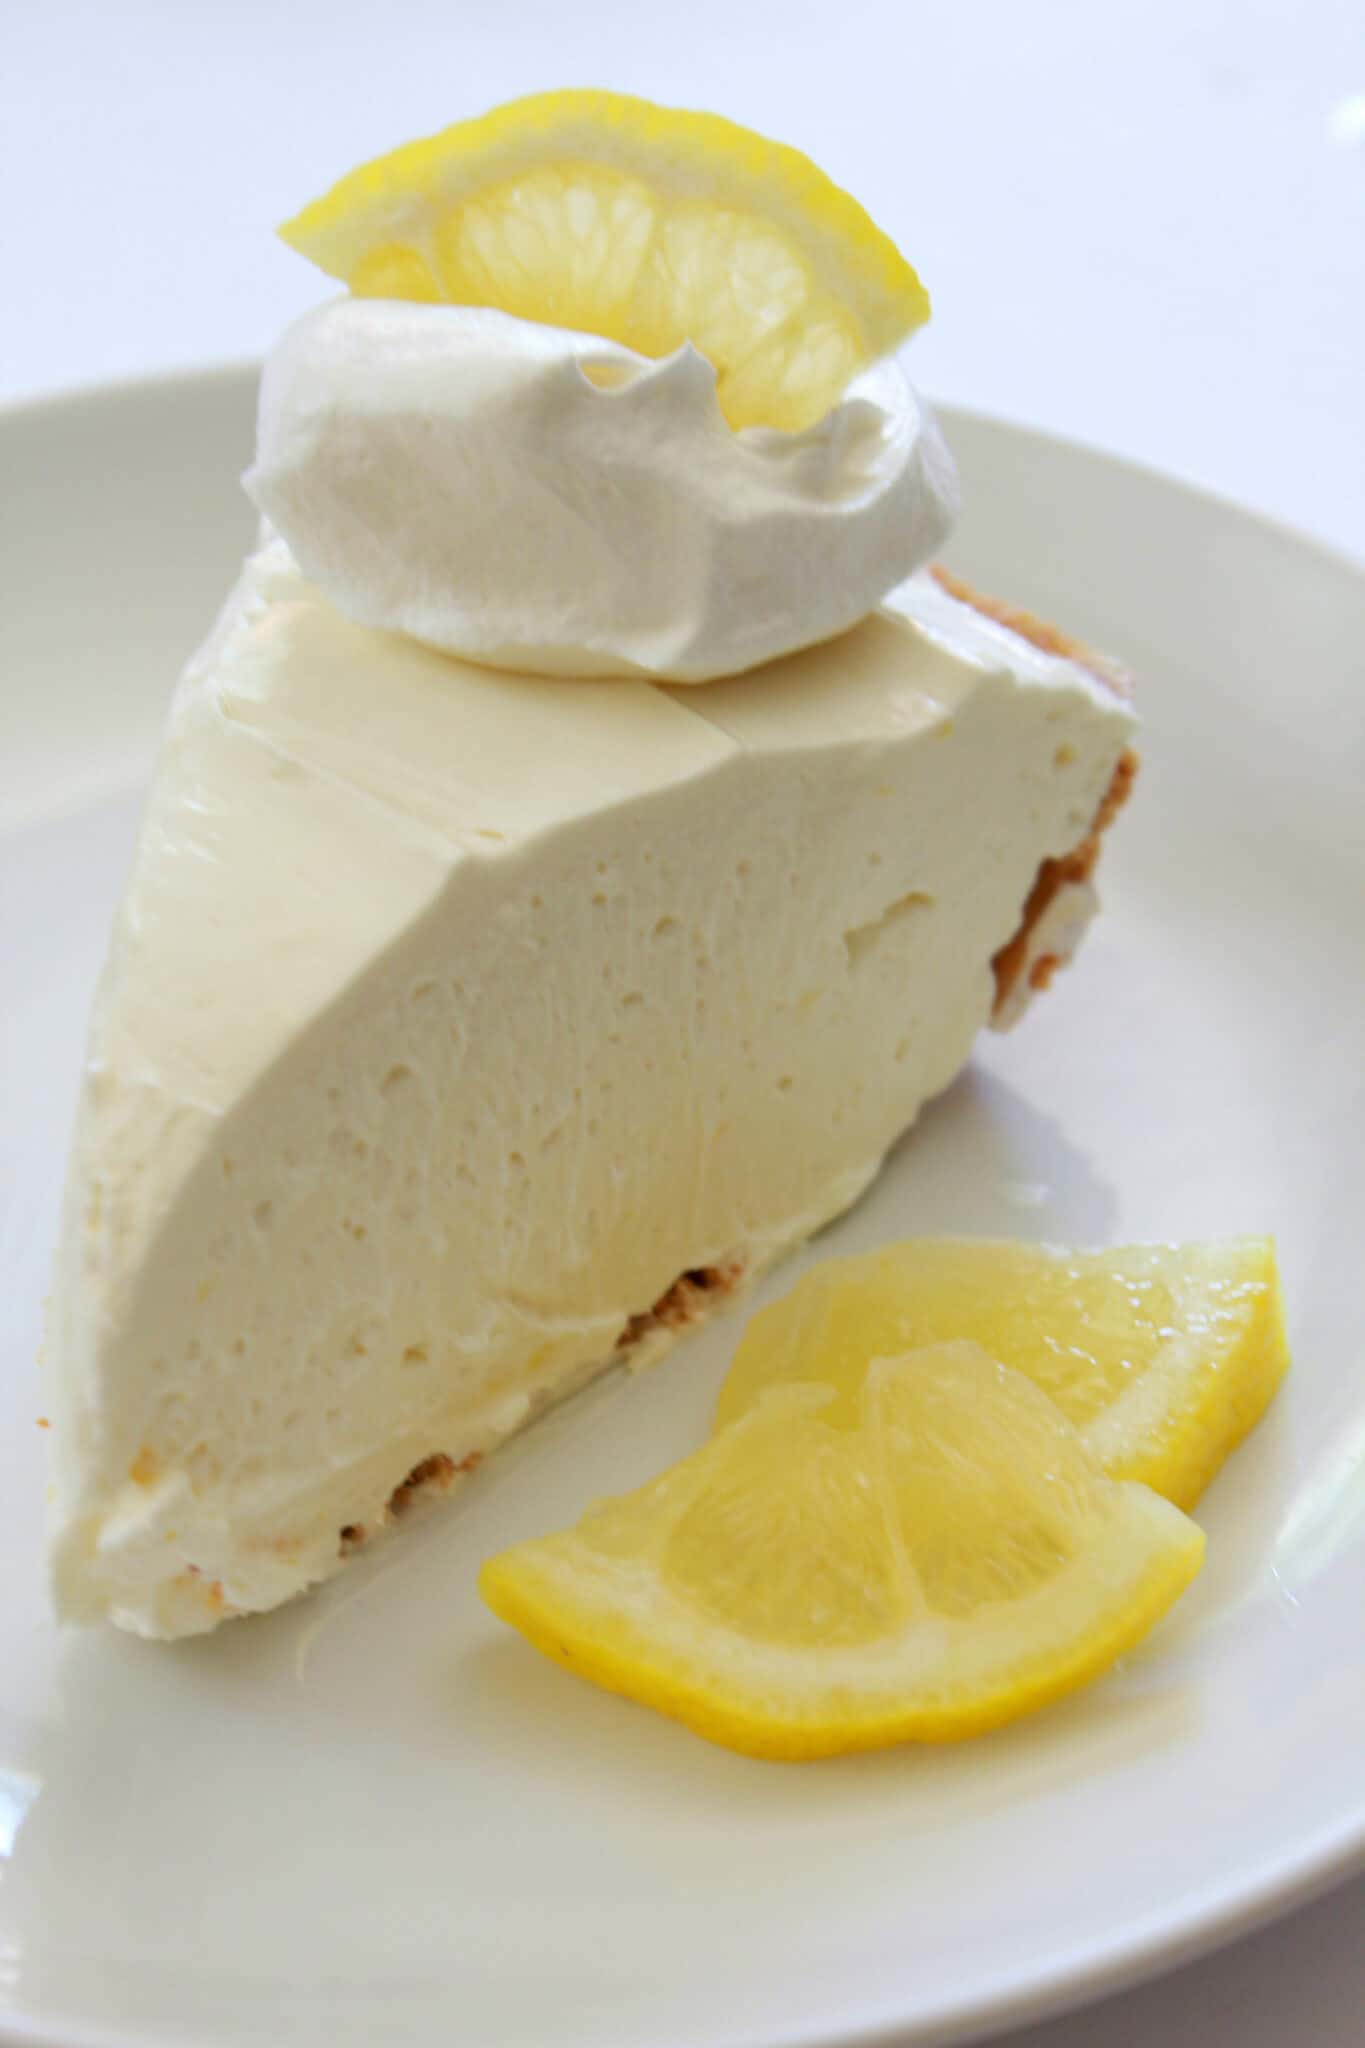 Best No Bake Cheesecakes of 2020 featured by top US dessert blogger, Practically Homemade: no bake lemon cheesecake